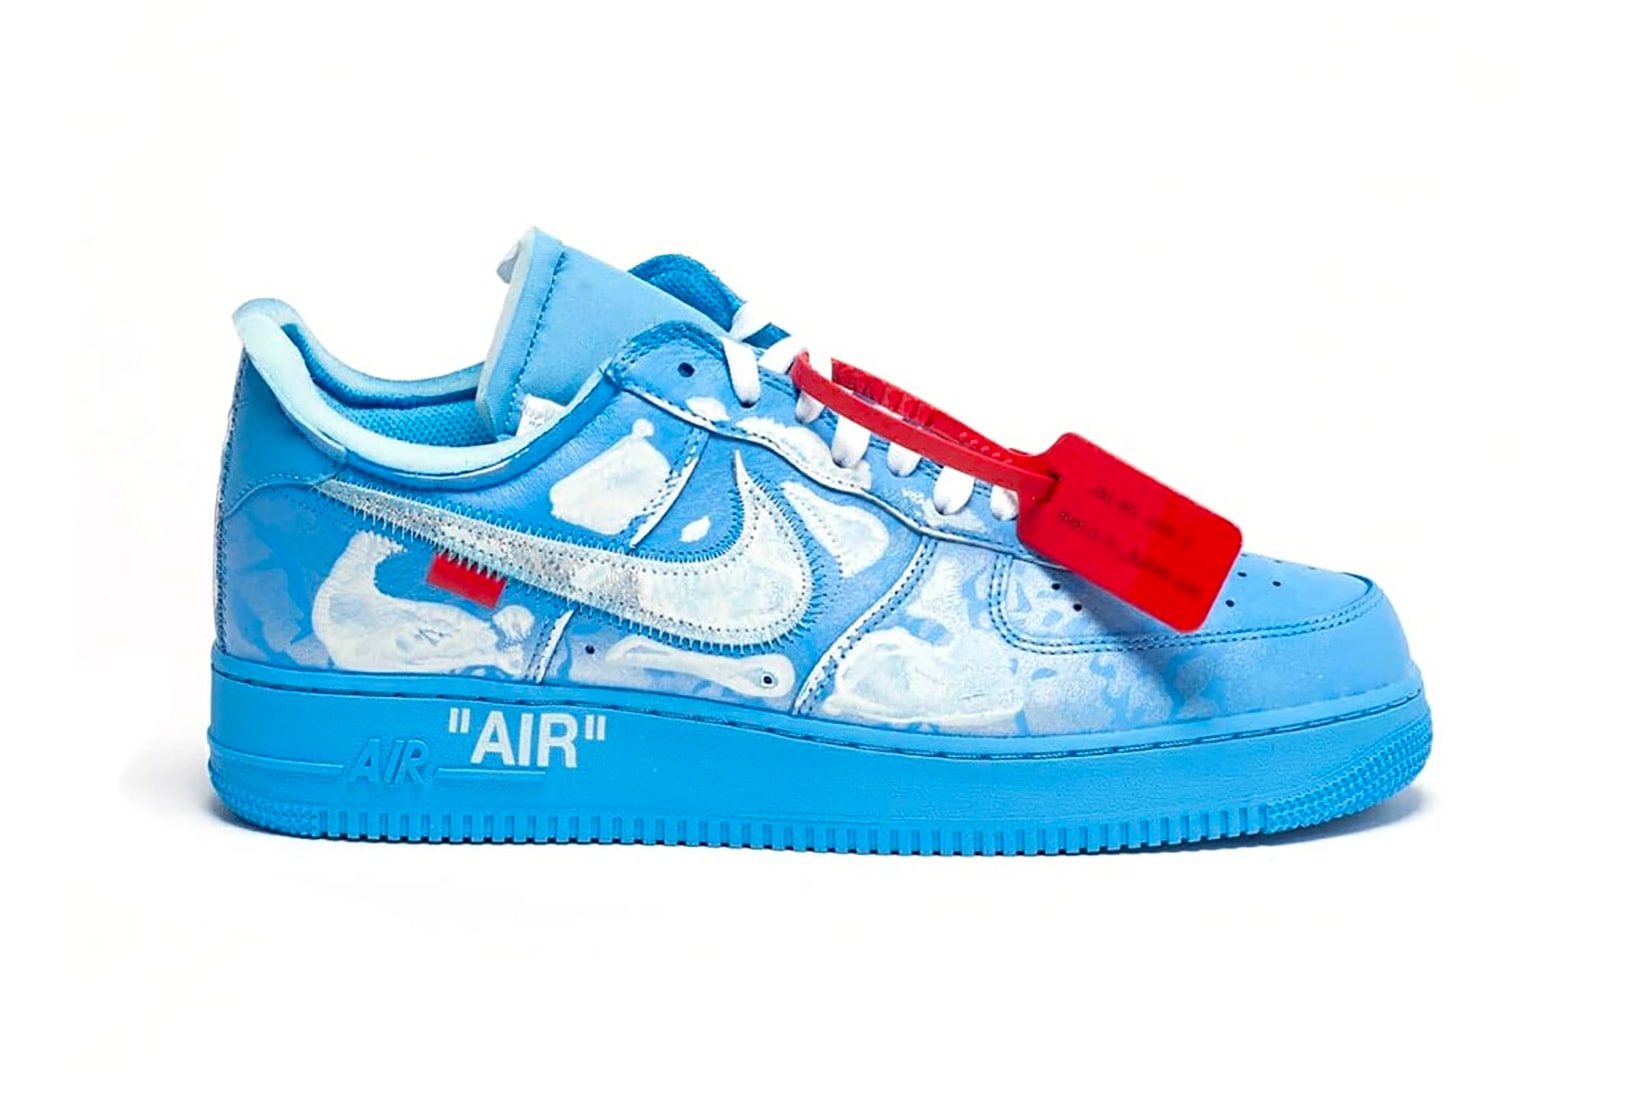 Reworked Gucci Nike AF1 (Women's)